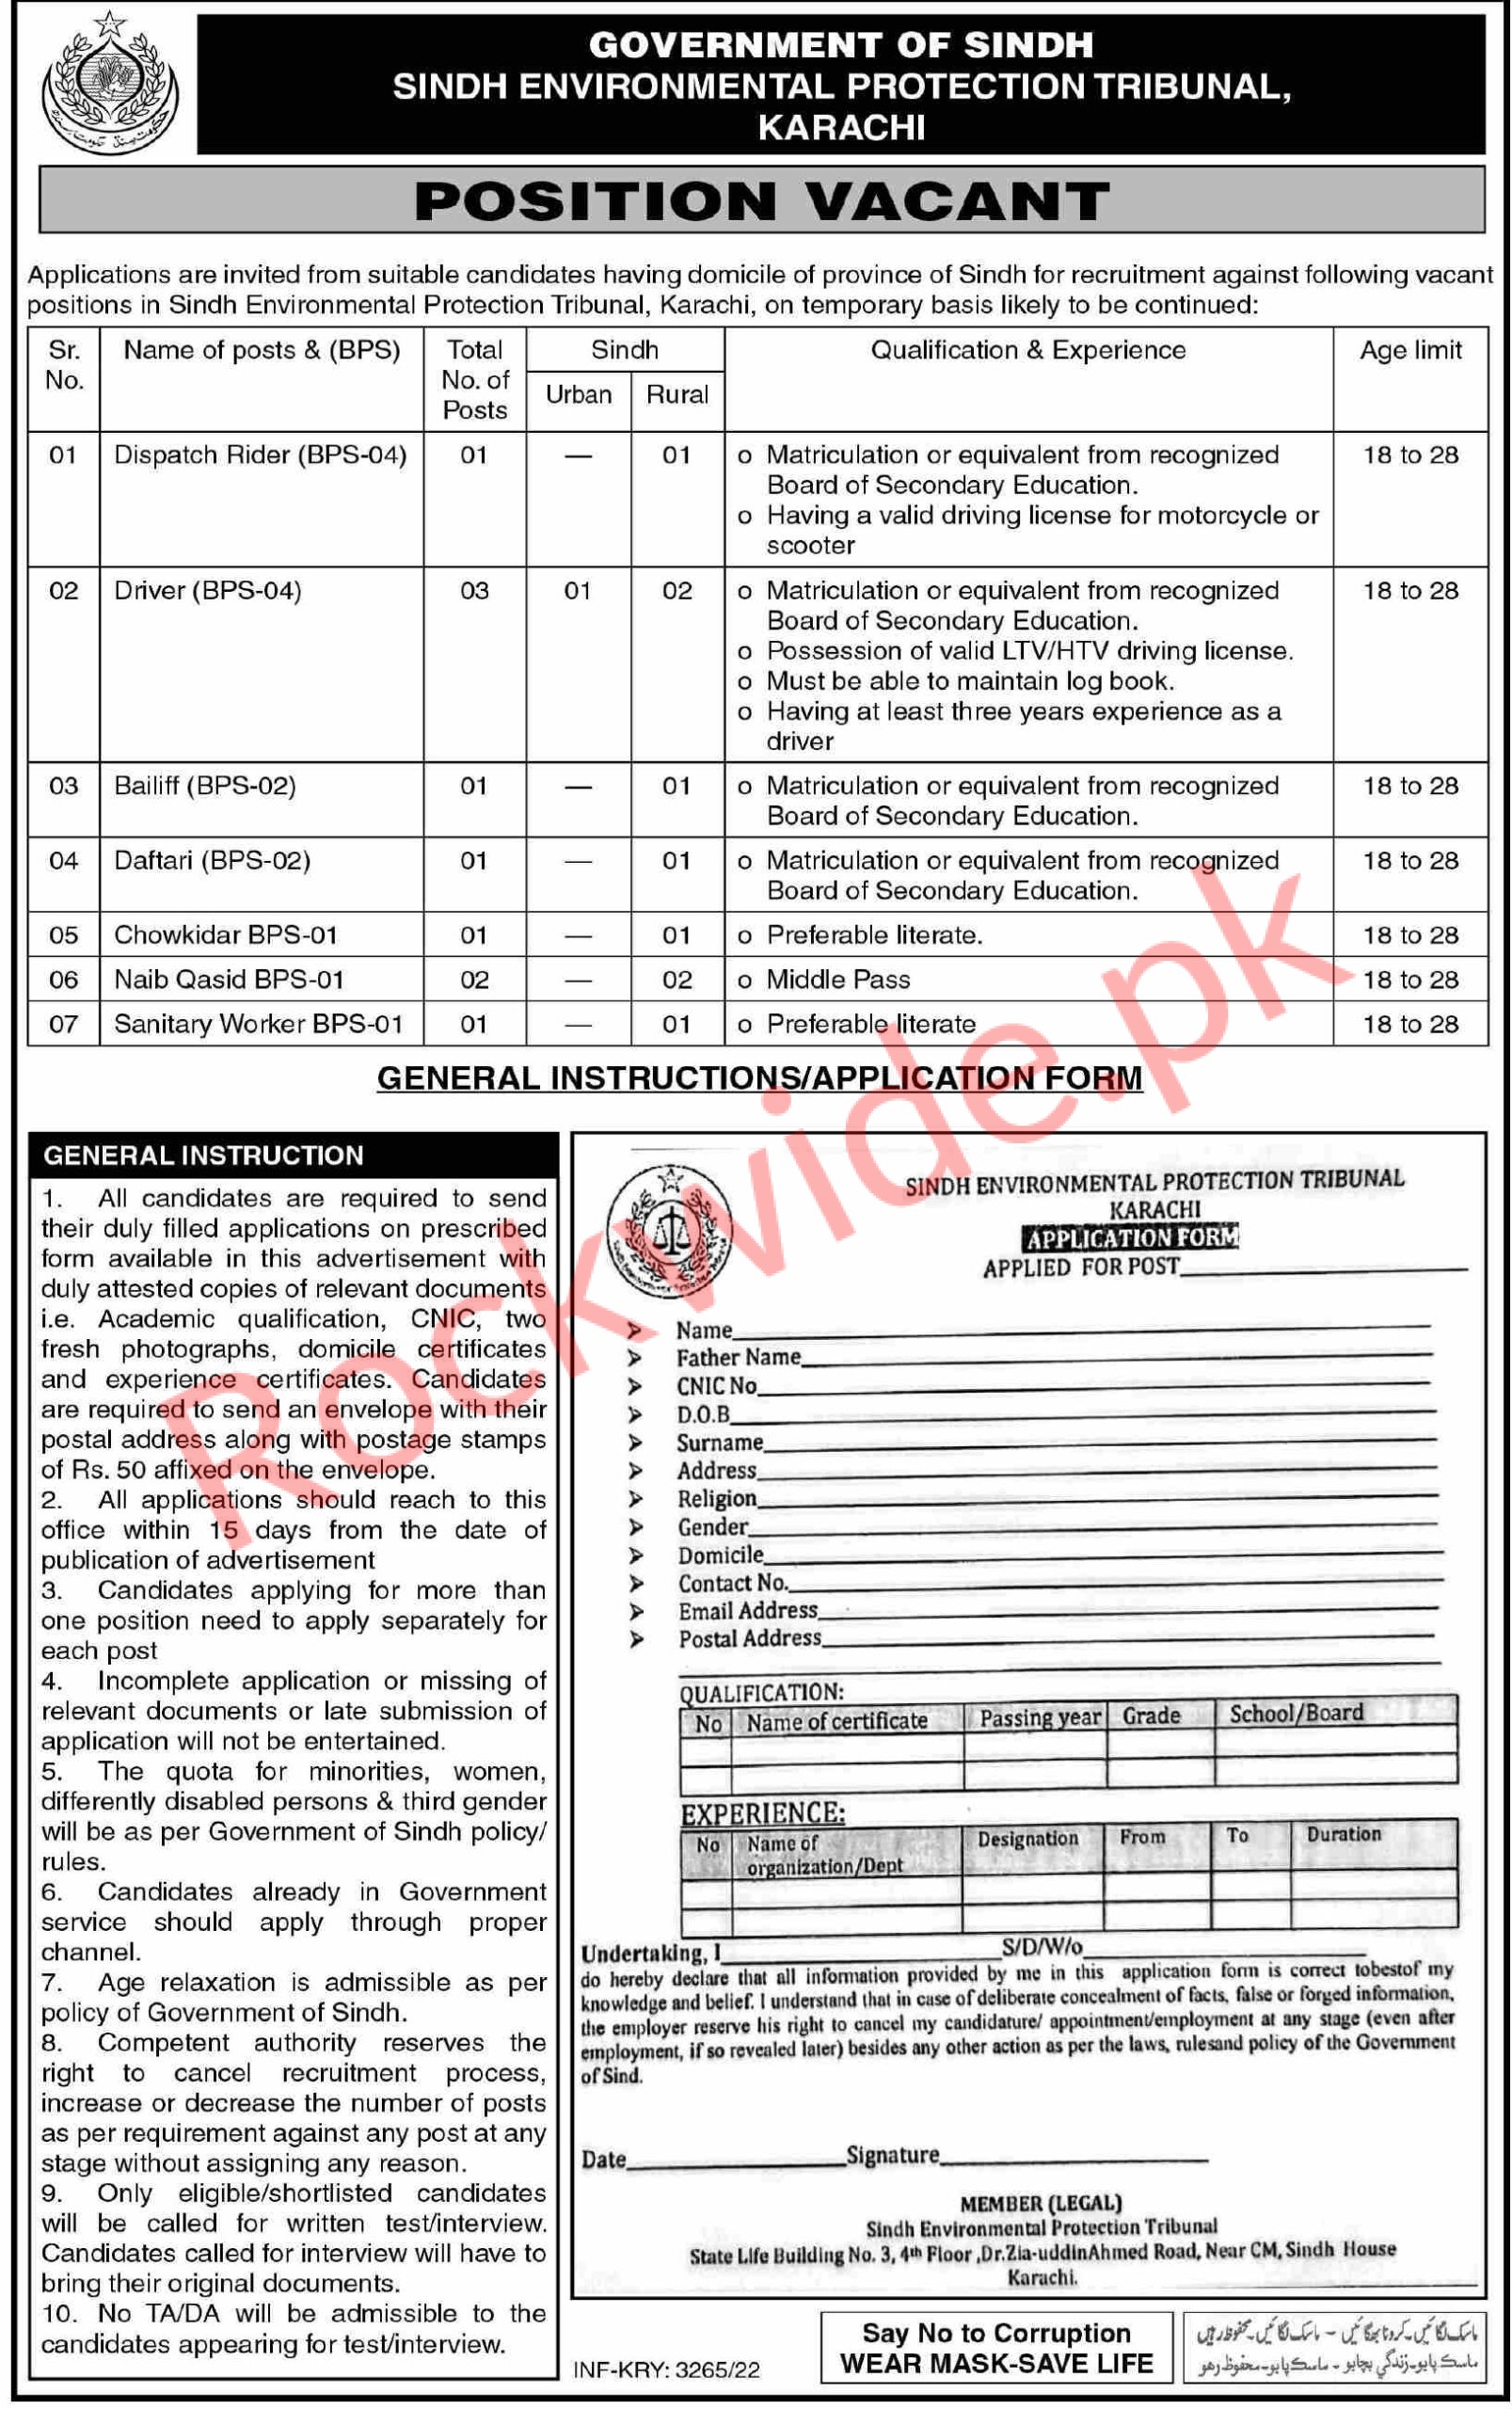 Government of Sindh Environmental Protection Tribunal Jobs in Karachi